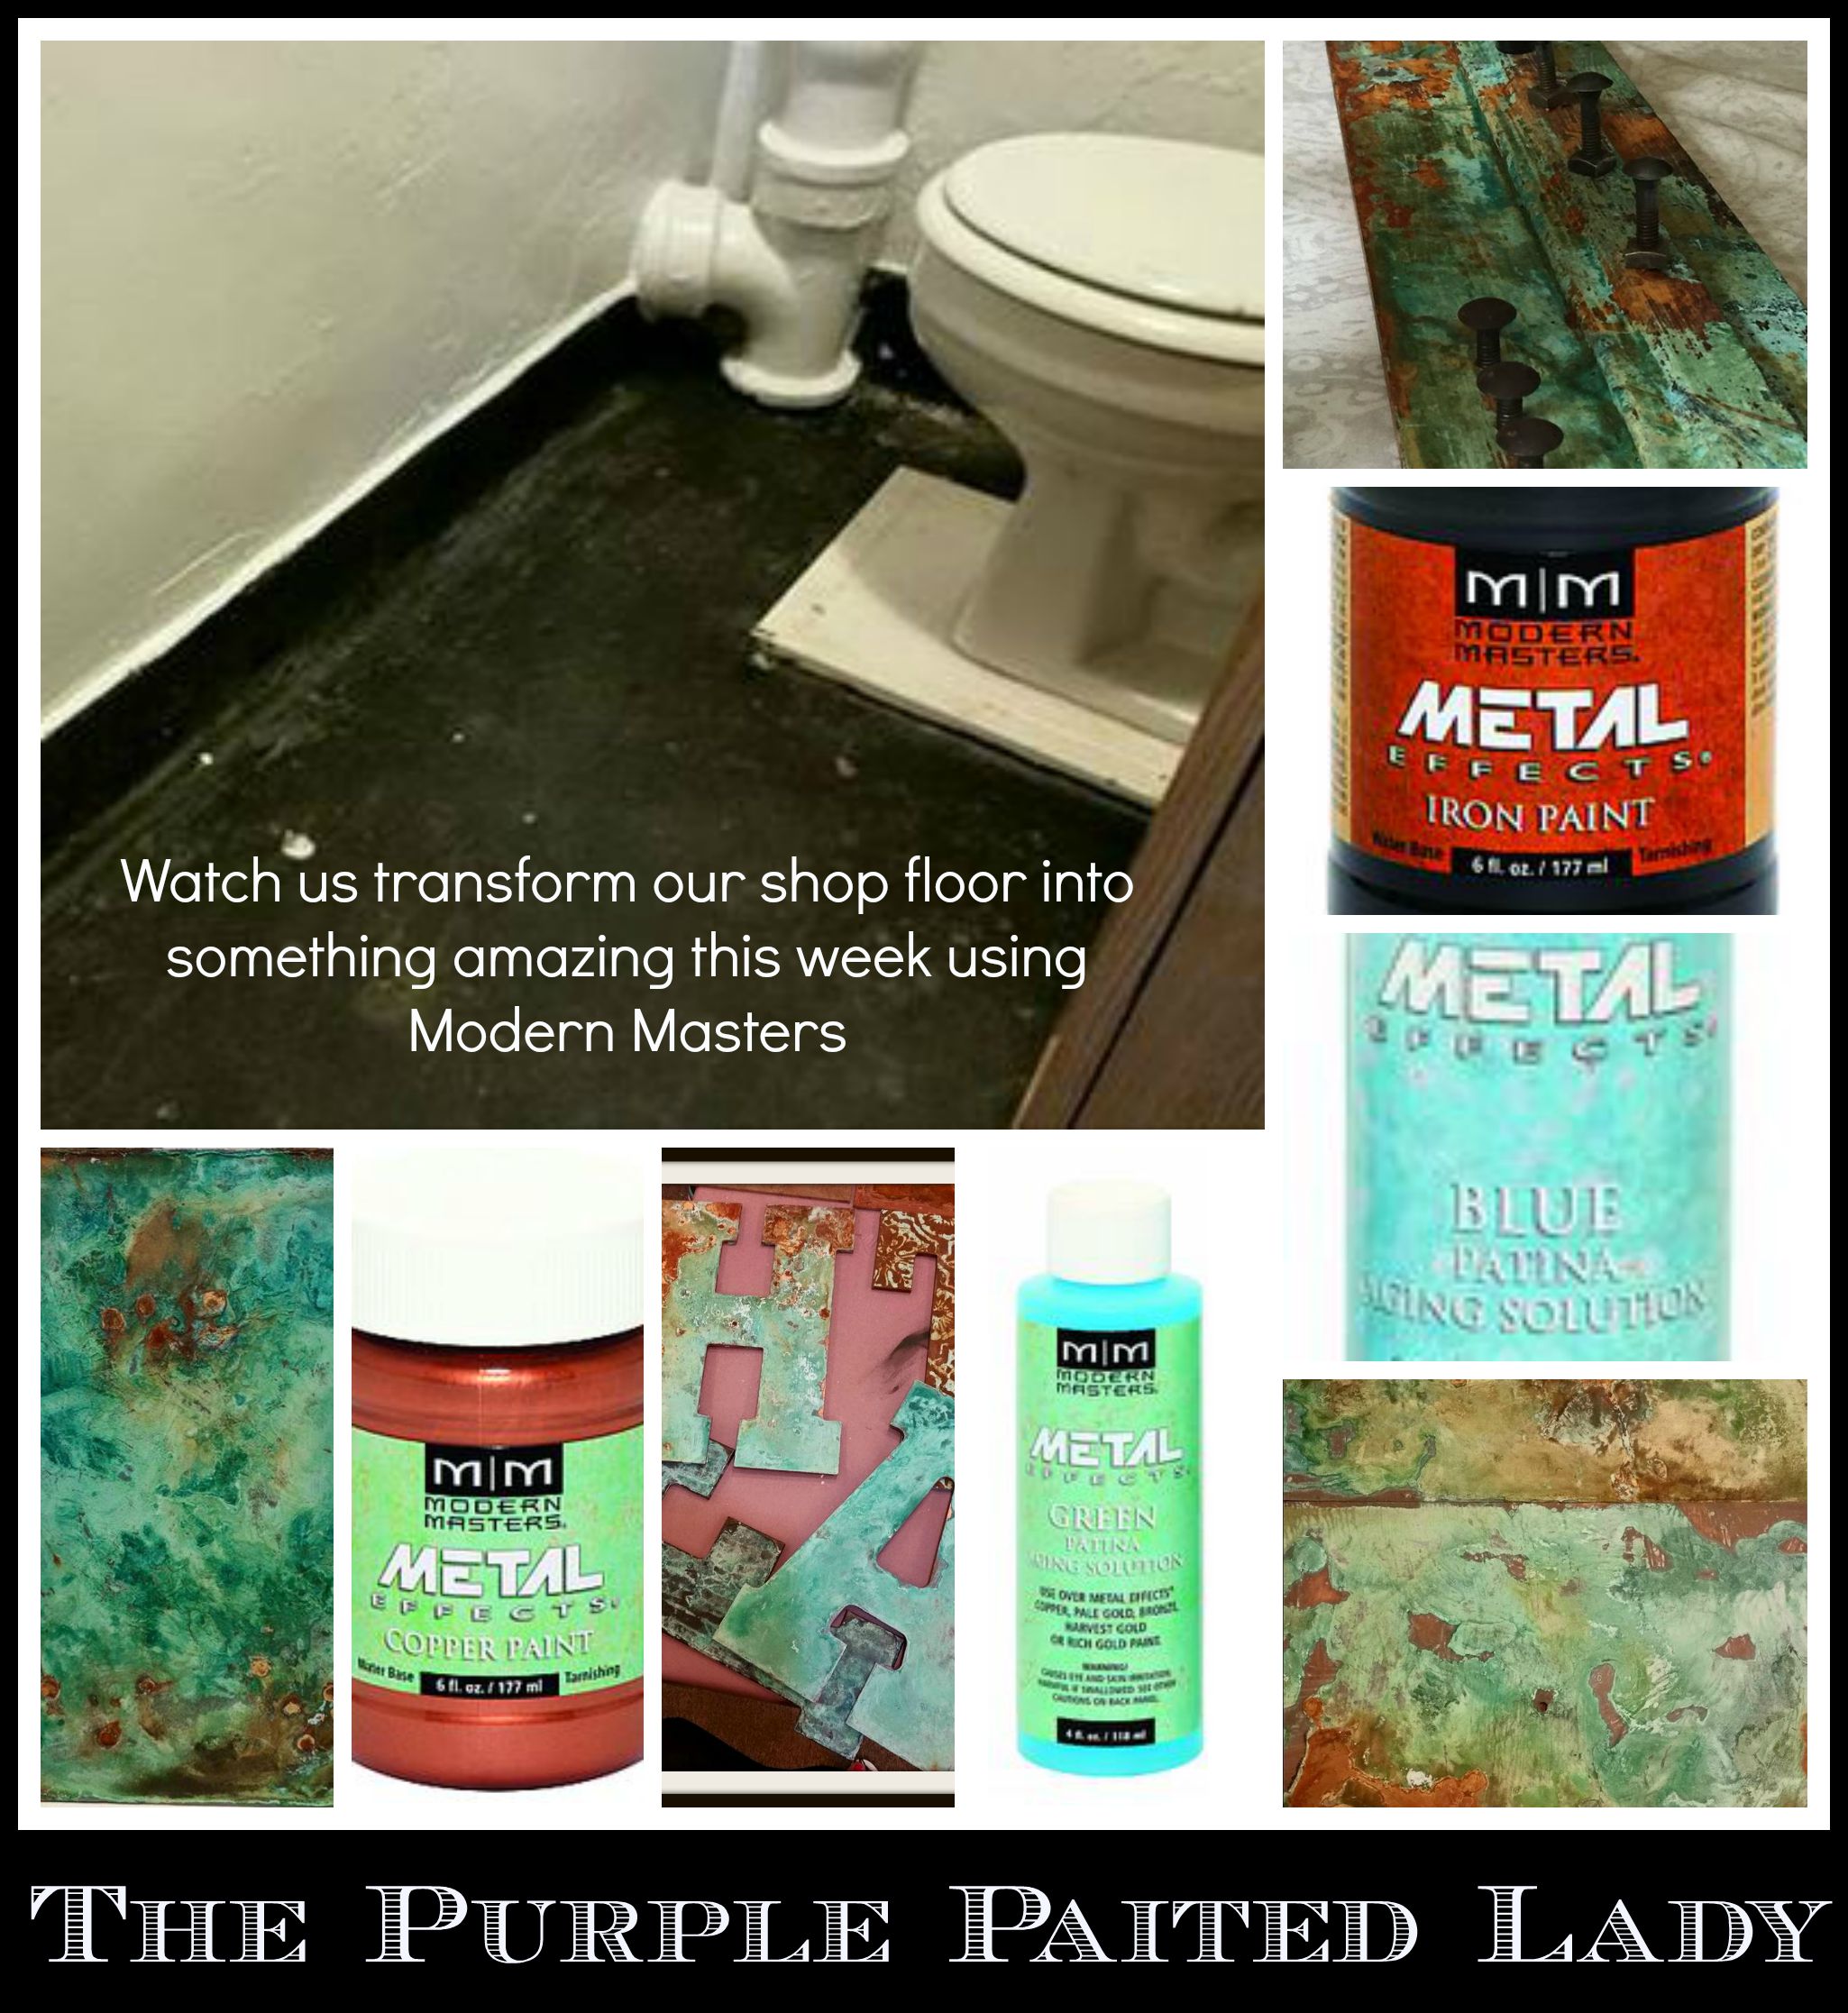 The Purple Painted Lady Bathroom floor South wedge Modern Masters collage